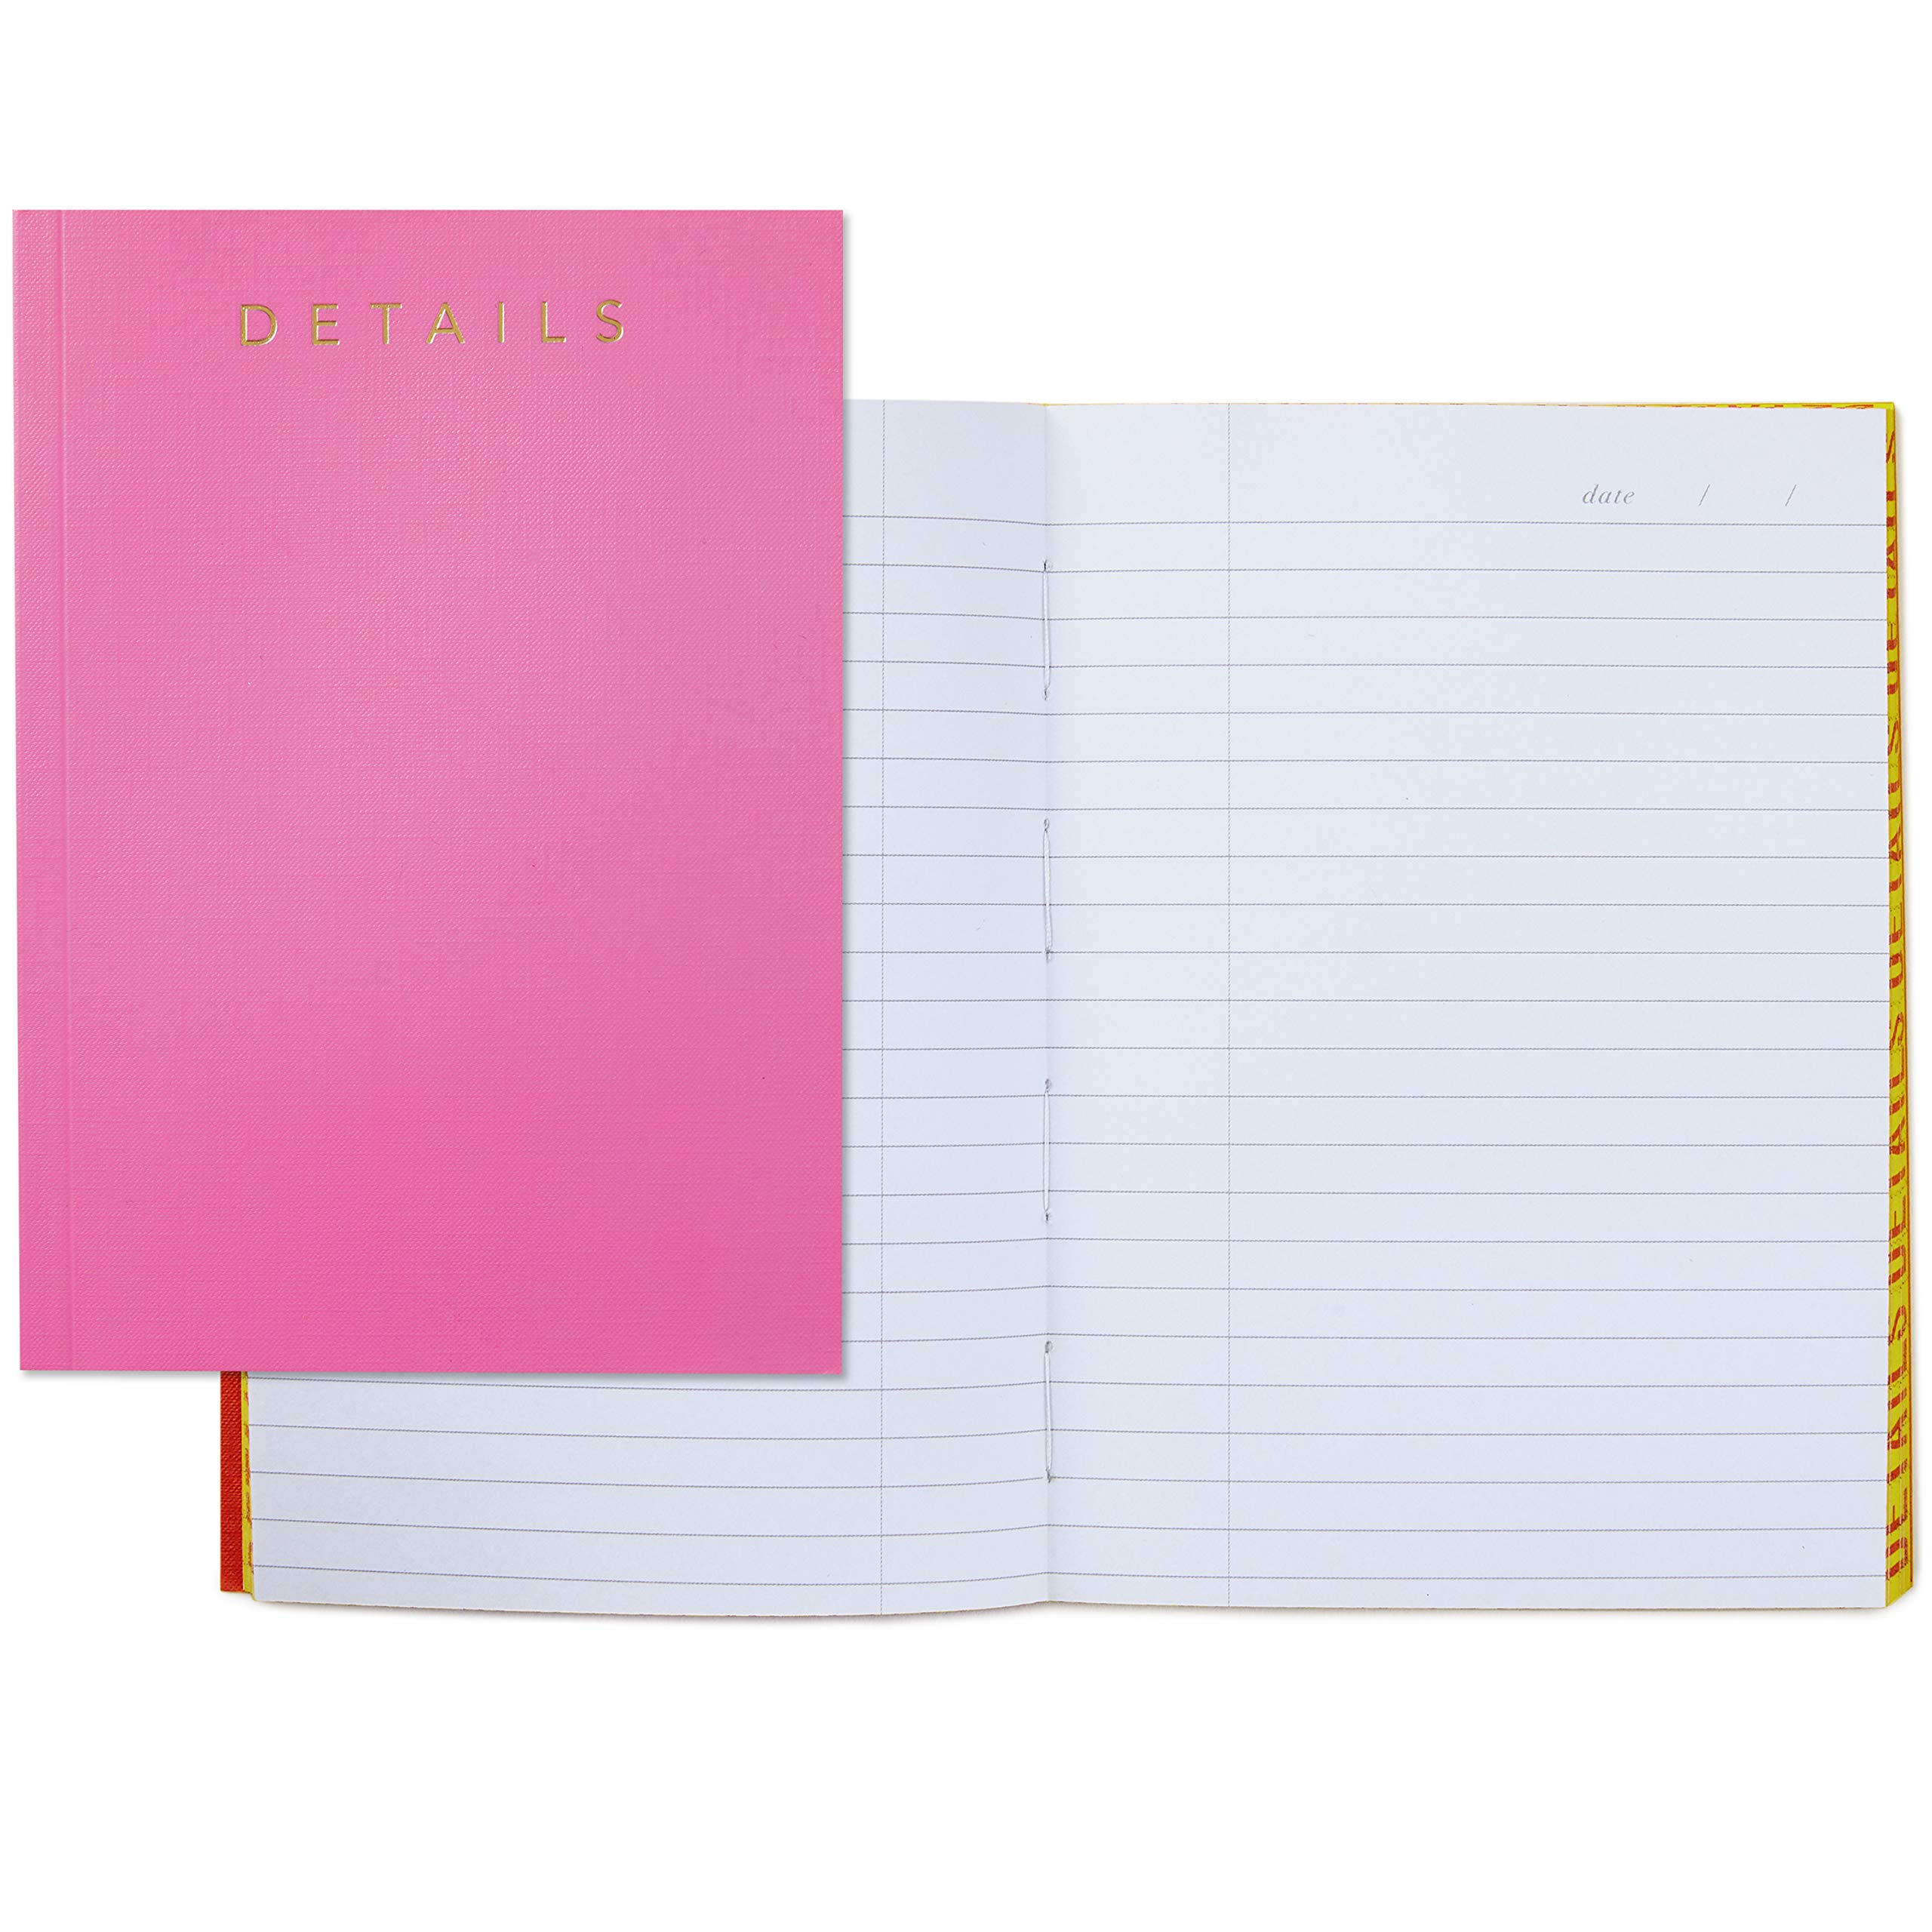 200-Page 6" x 8" Hallmark Softcover Journal (Pink) $3.20 + Free Shipping w/ Prime or on $35+